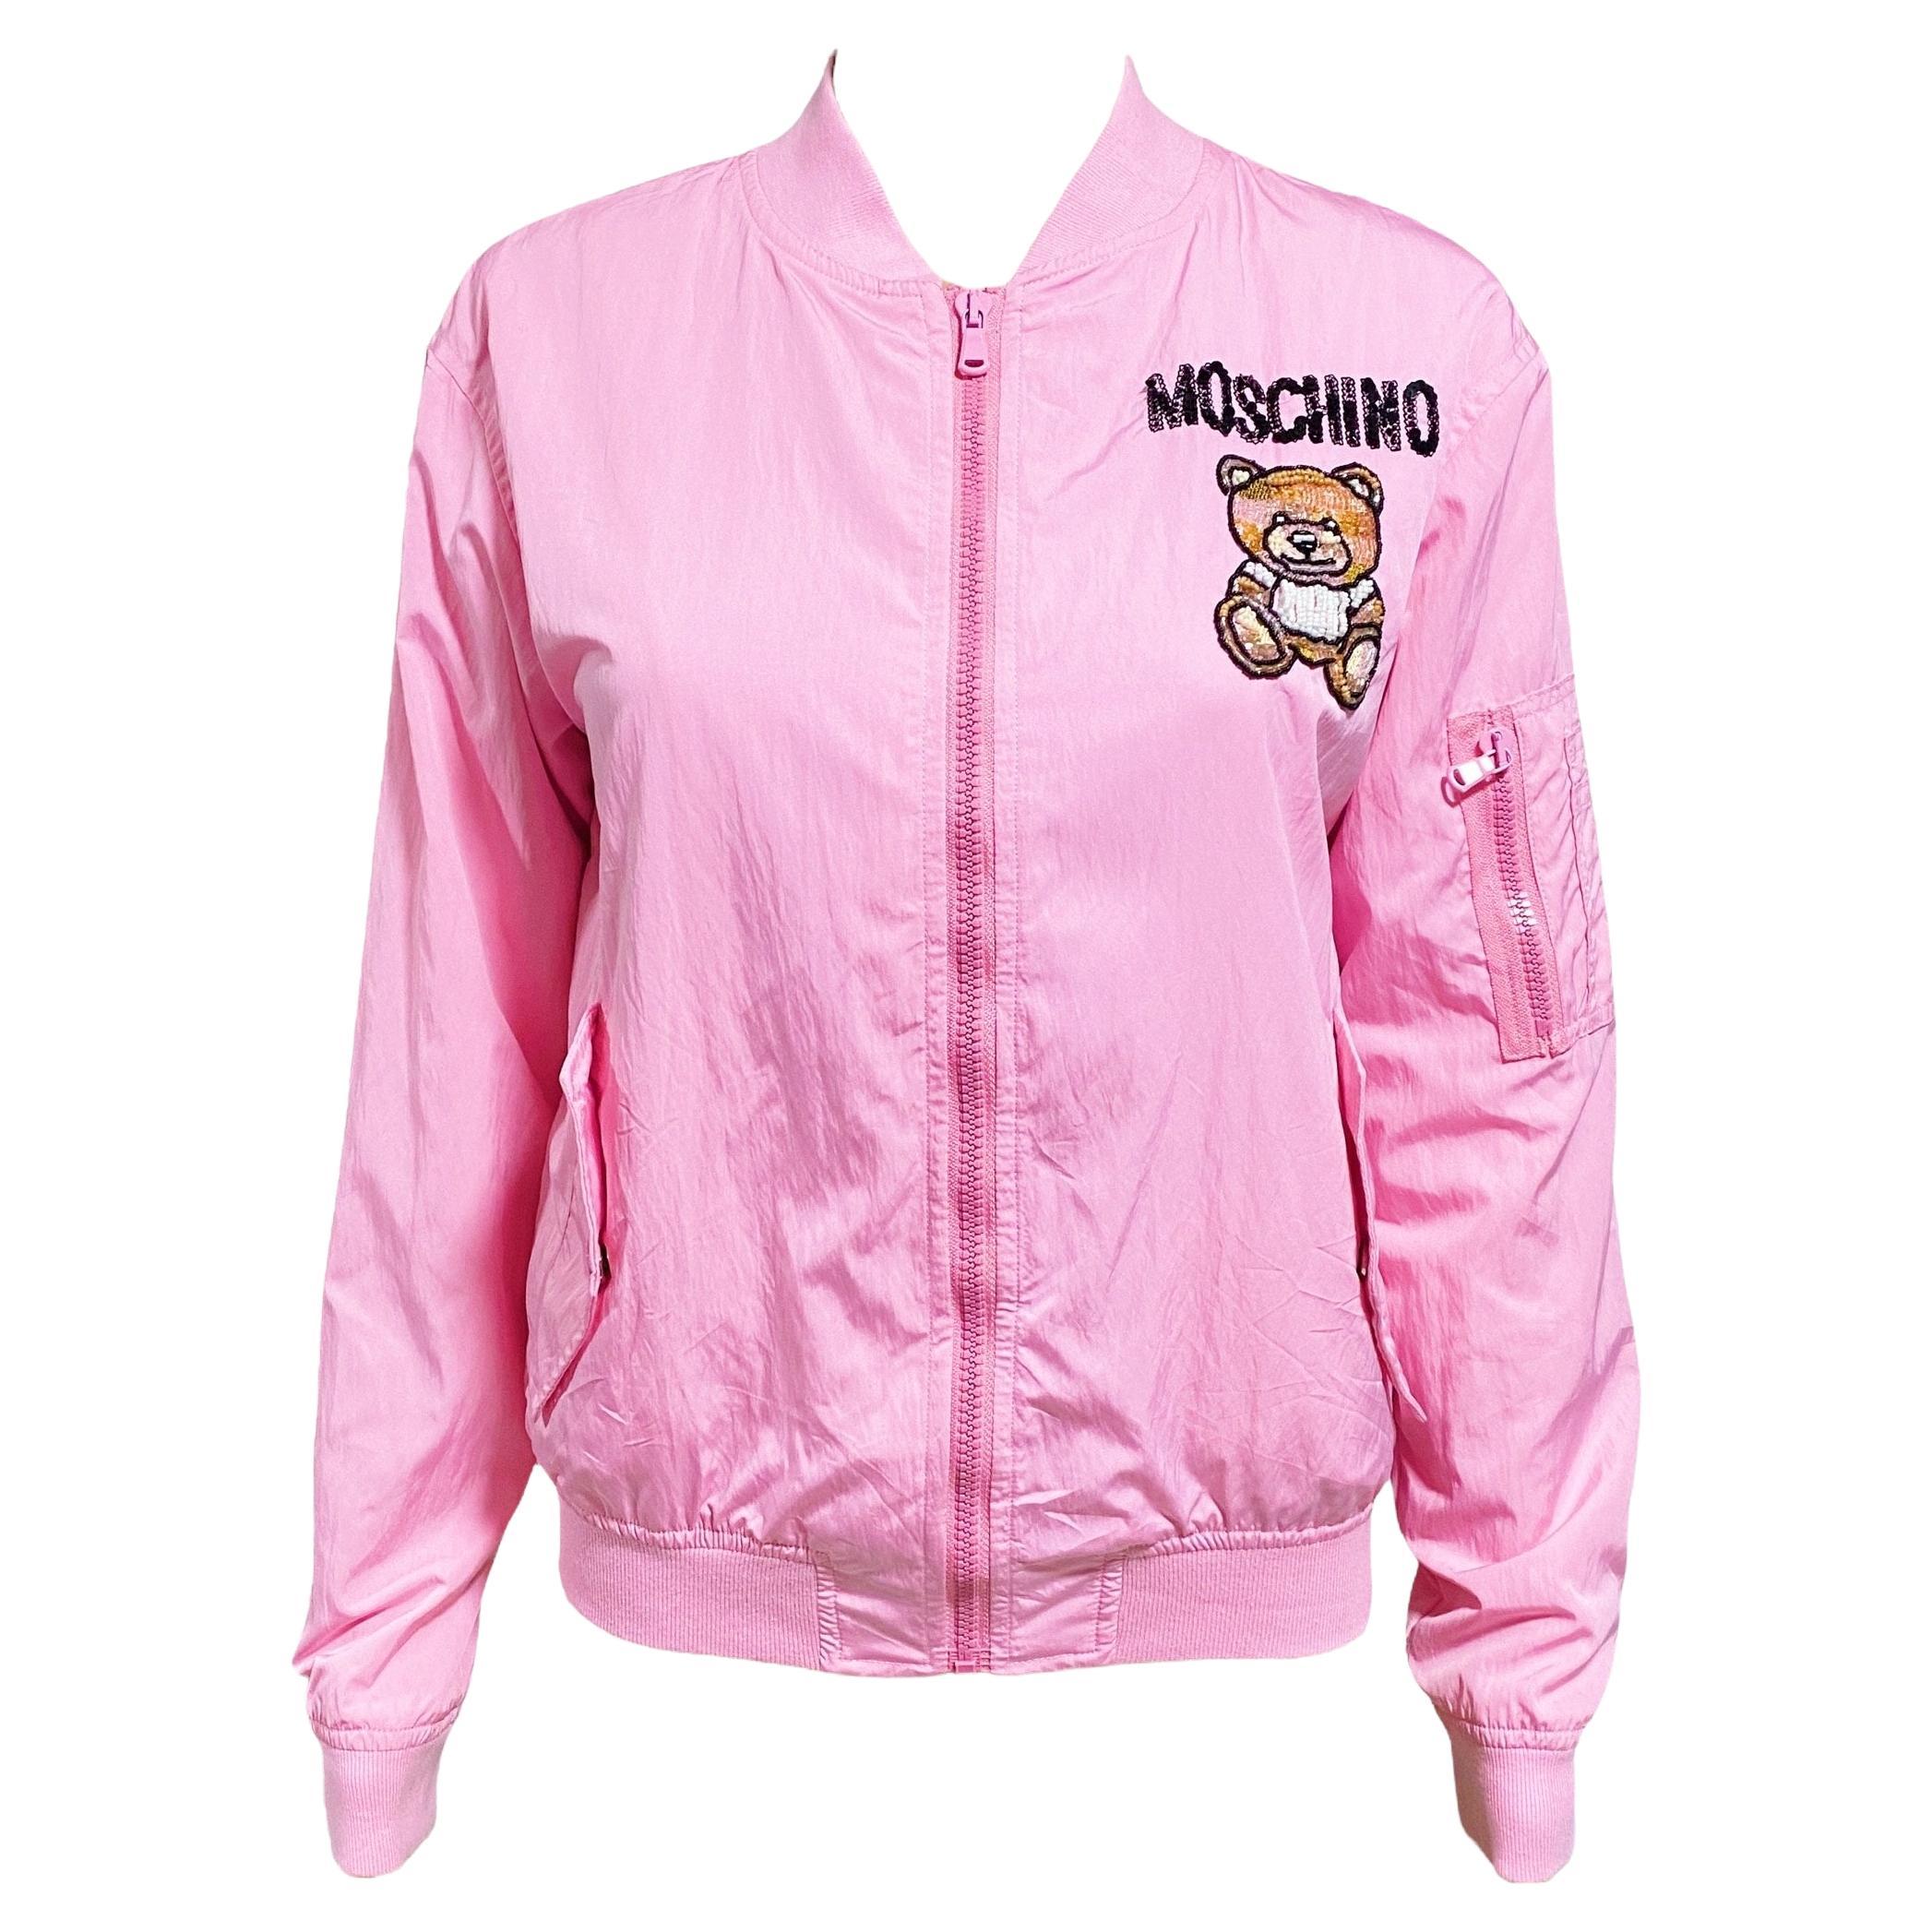 Moschino Rare Sequin Teddy Bomber Jacket in Pink For Sale